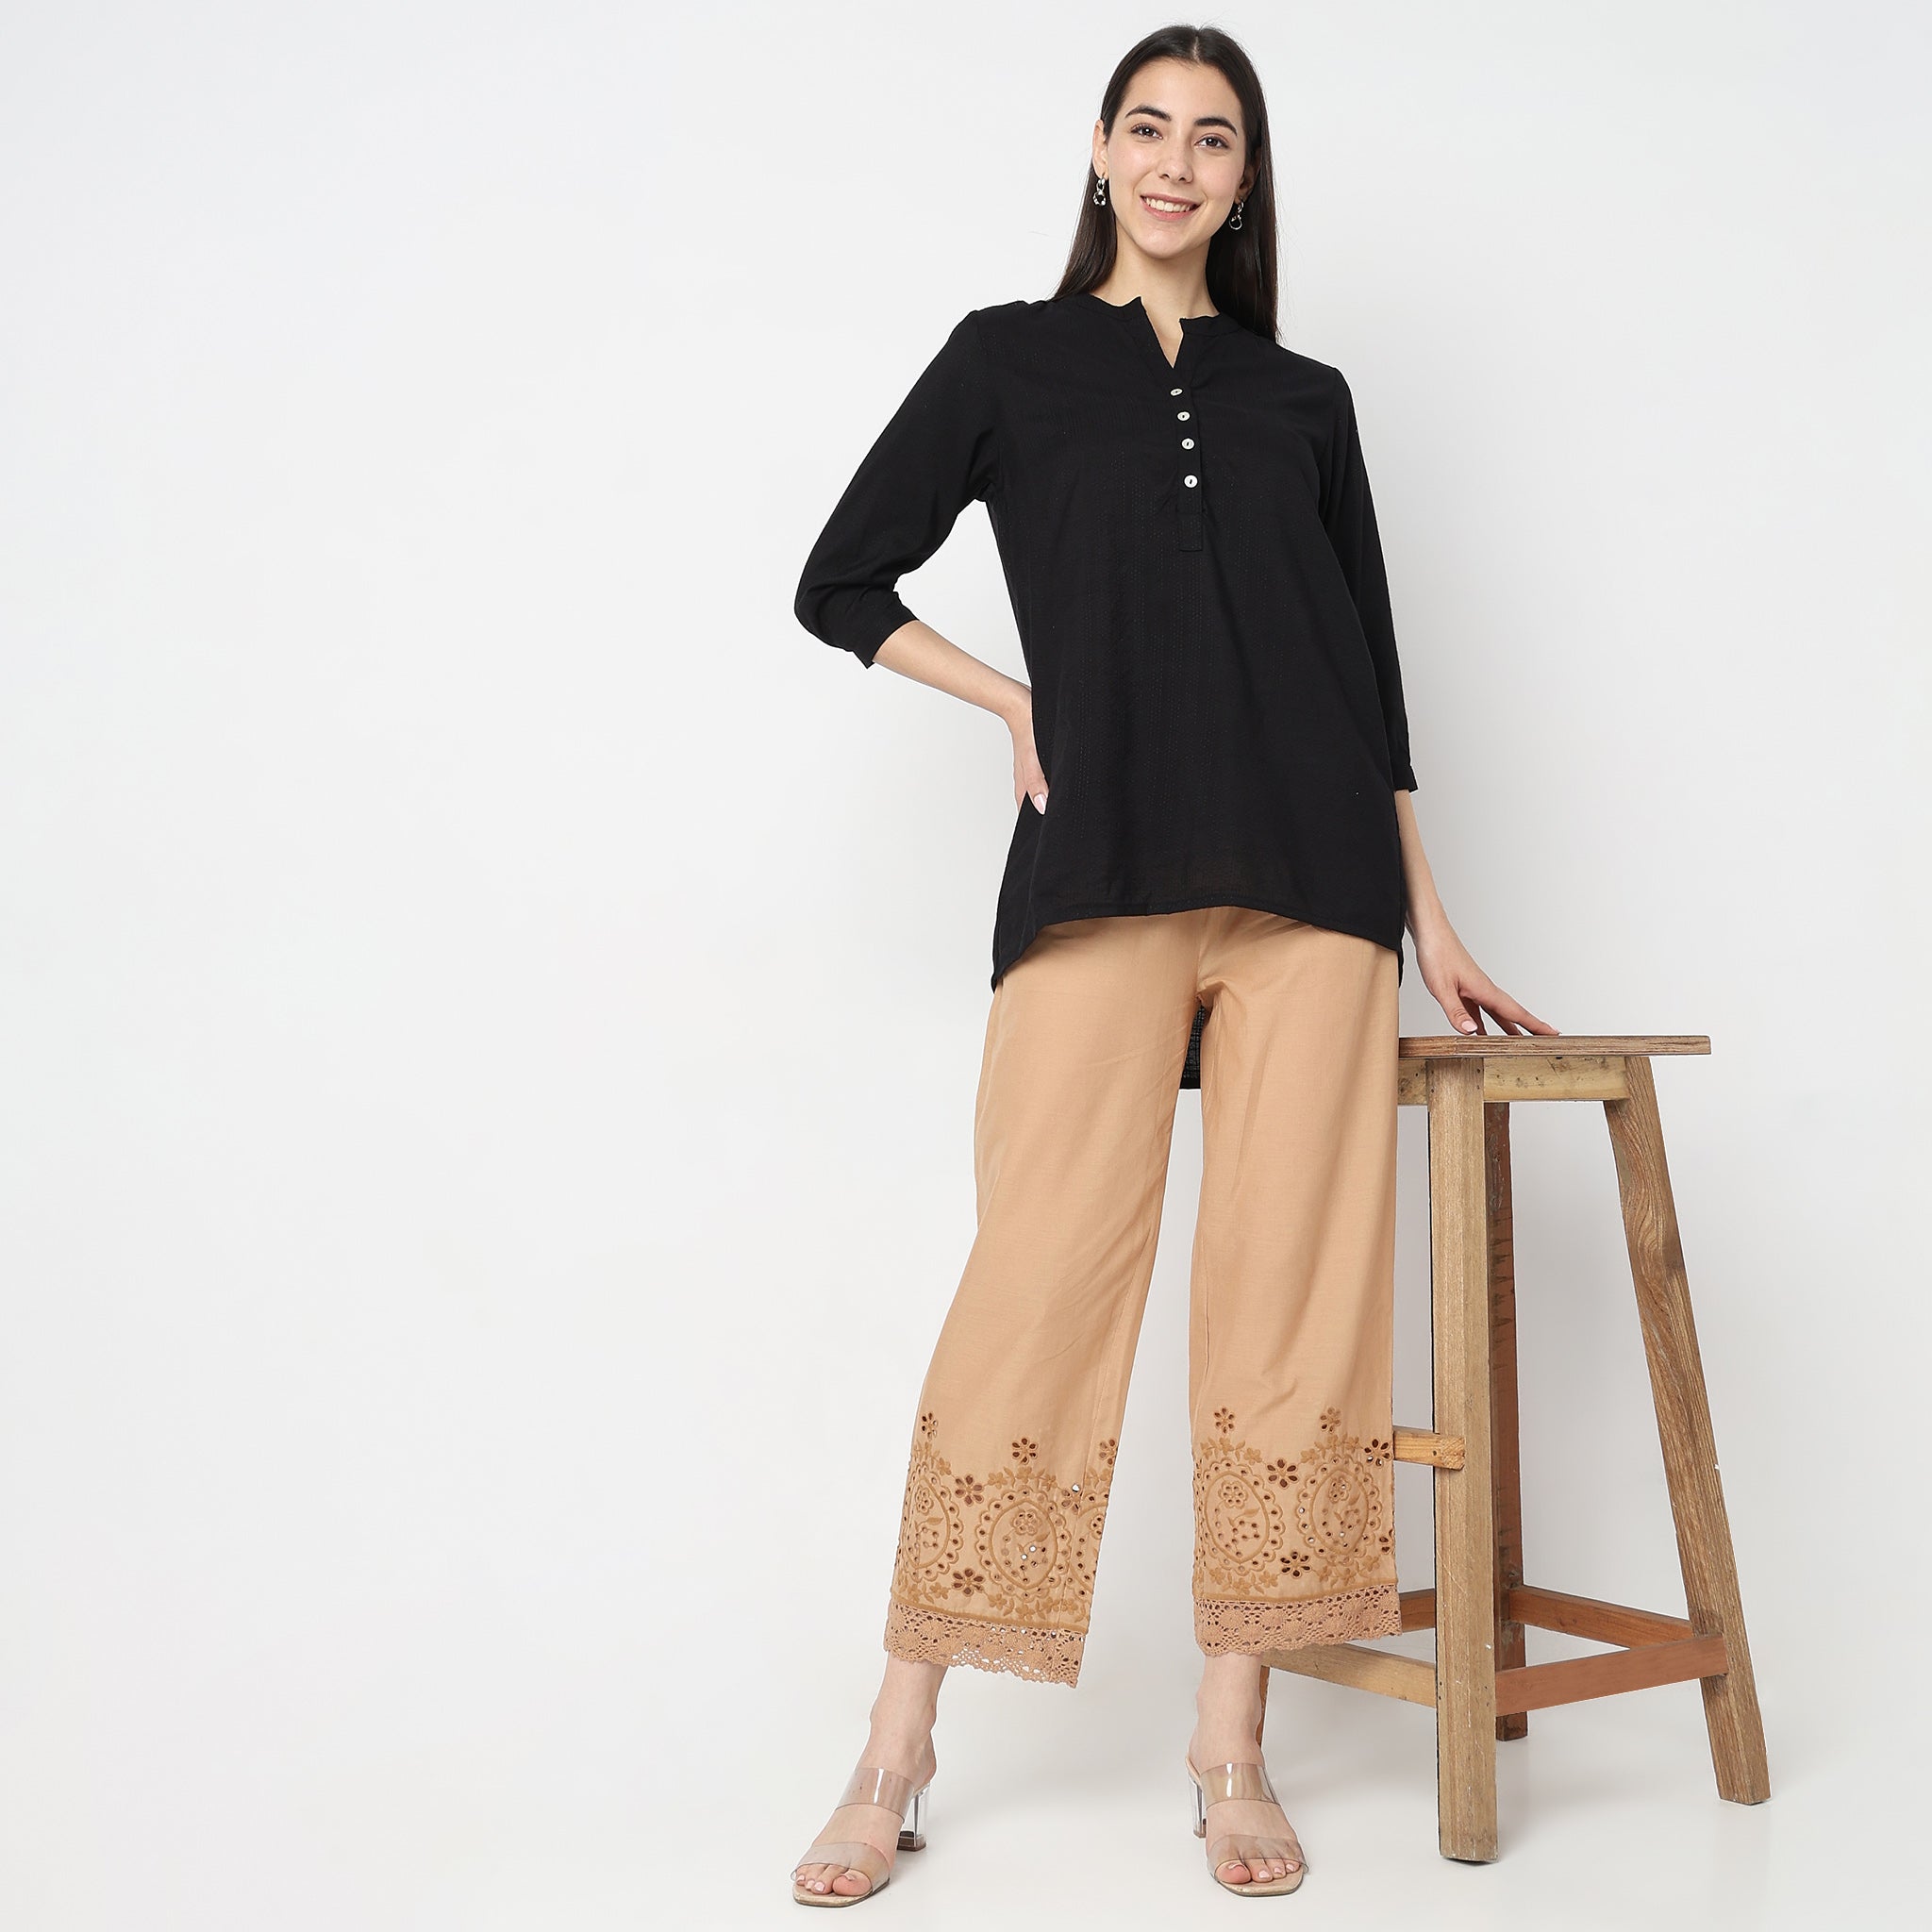 Regular Fit Embroidered Mid Rise Ethnic Pants